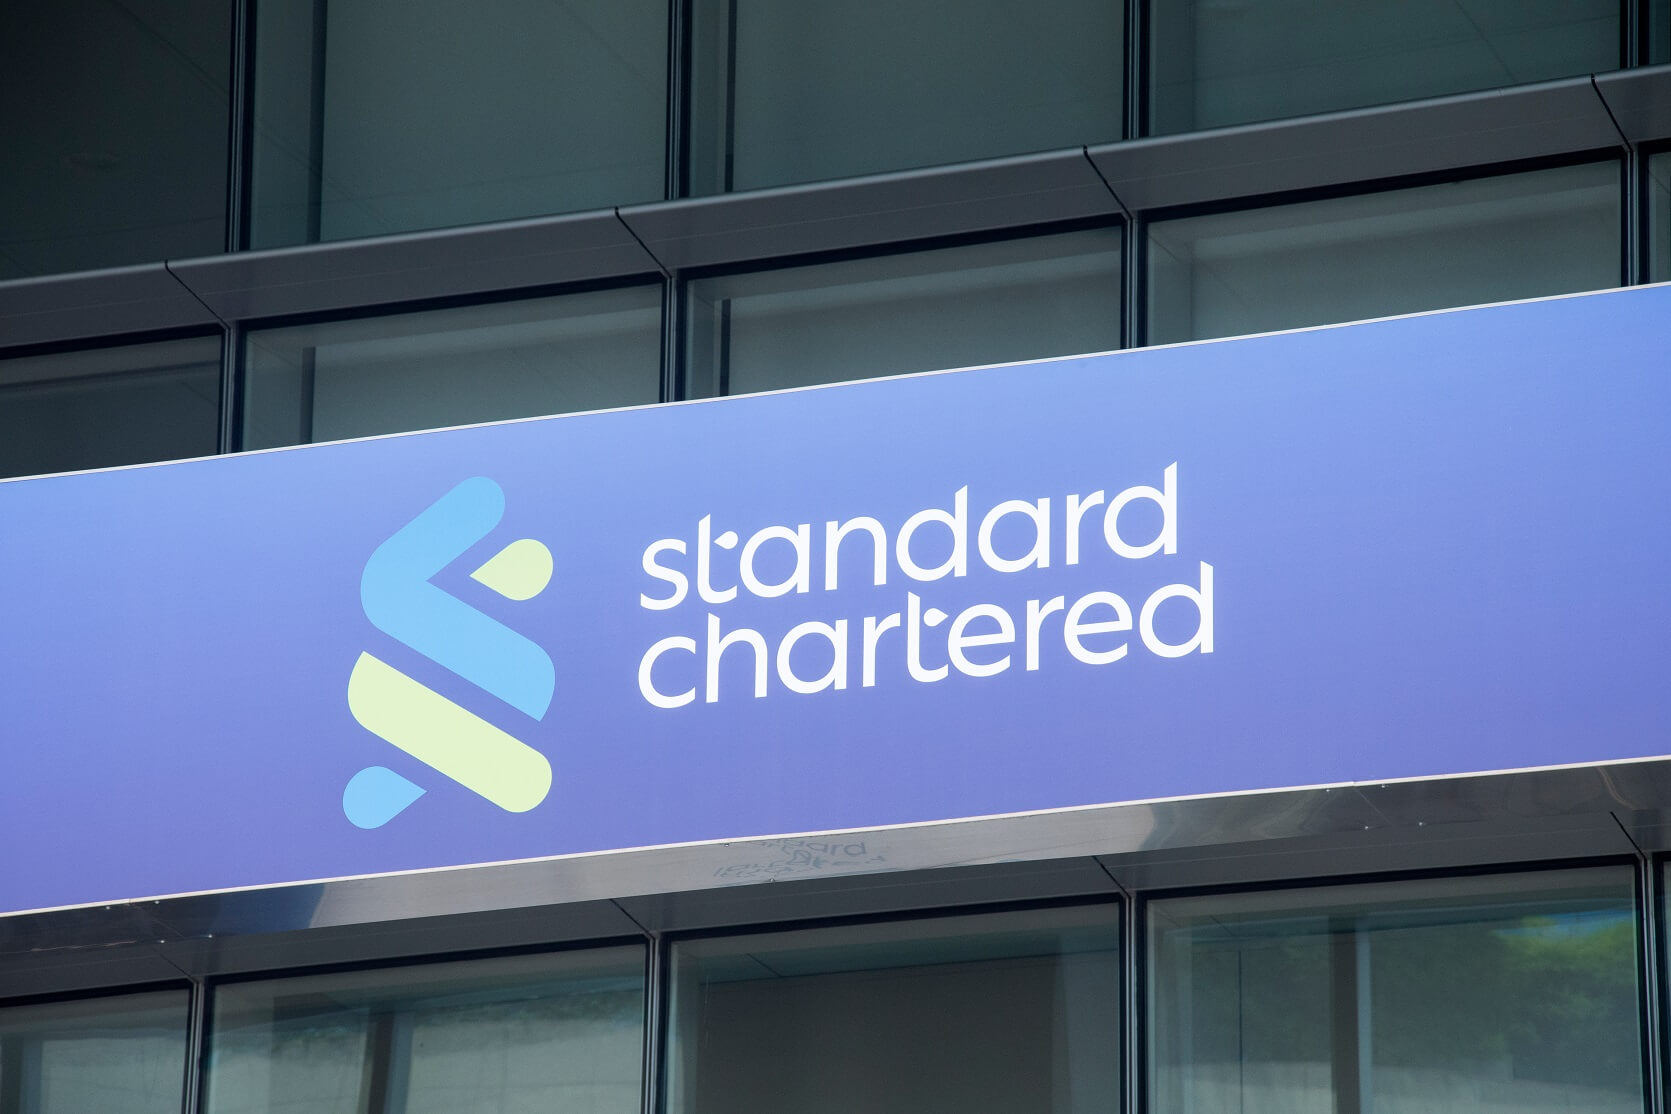 Today in Crypto: Standard Chartered Says BTC Could Hit $100K by 2025, Bank of Korea Allowed to Investigate Crypto Business Operators, US Judge Orders Hydrogen to Pay $2.8M in Penalties